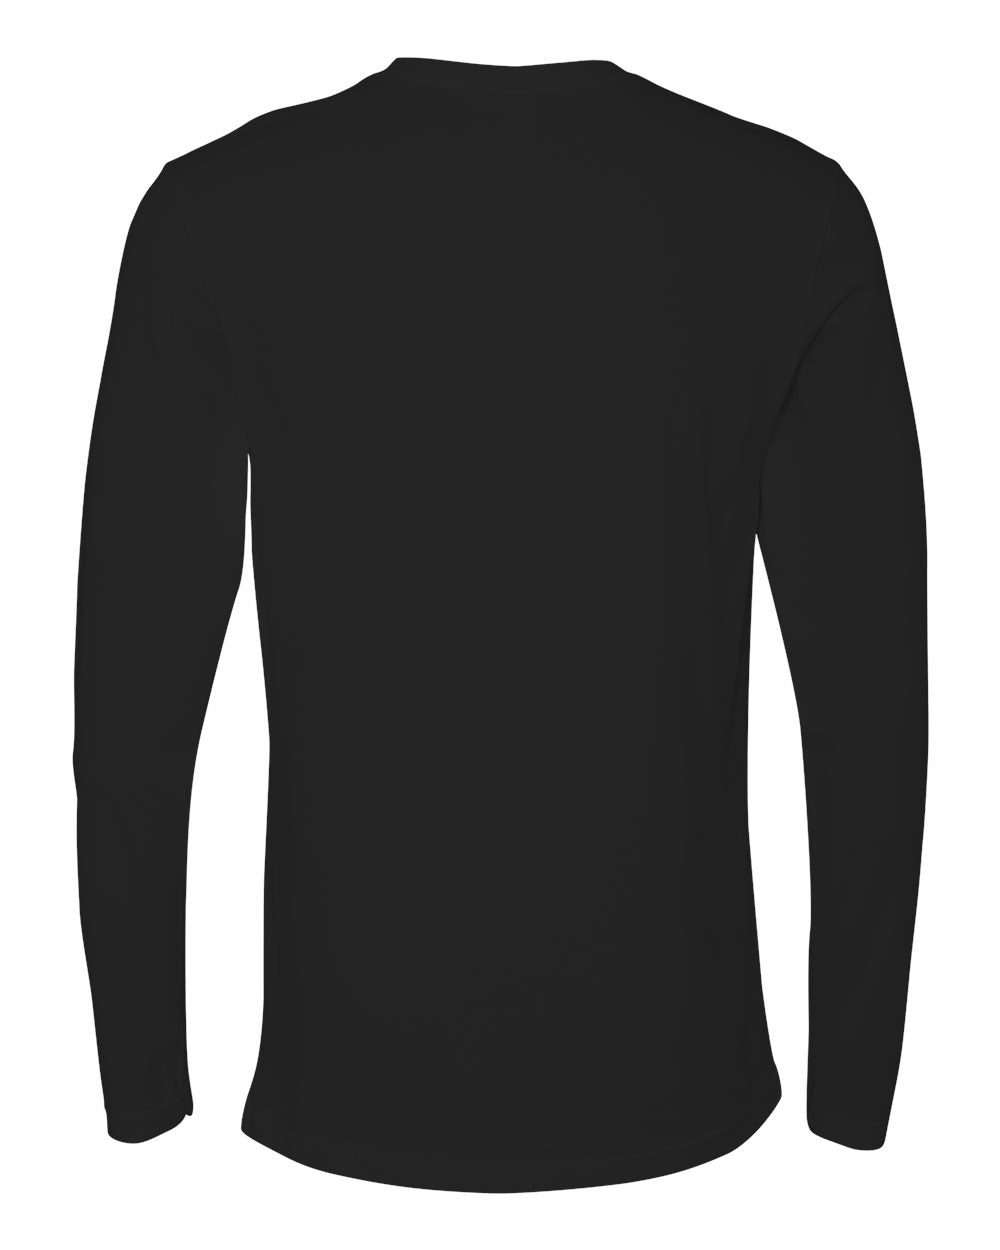 fully customizable next level cotton long body long sleeve tee shirt in multiple sizes and colors